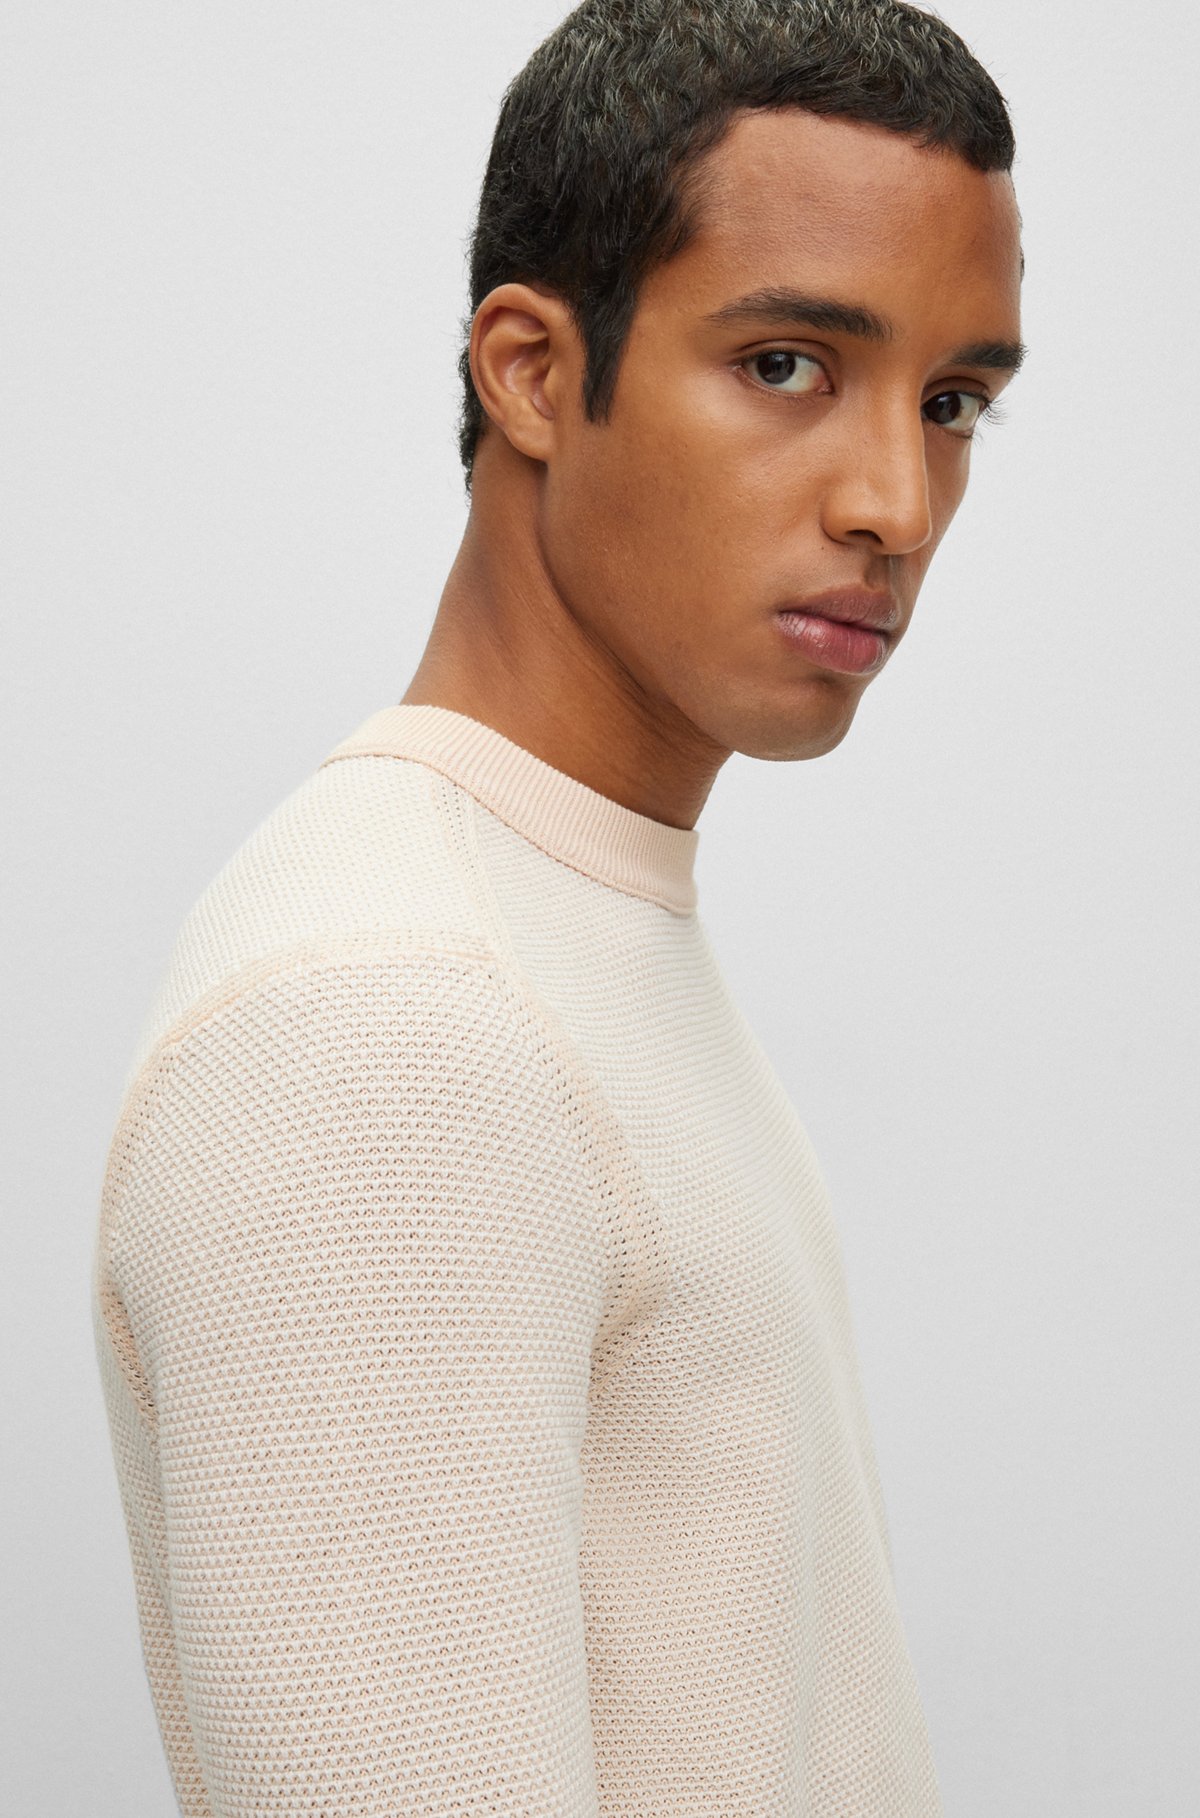 Cotton-blend sweater in two-tone knitted jacquard, Natural